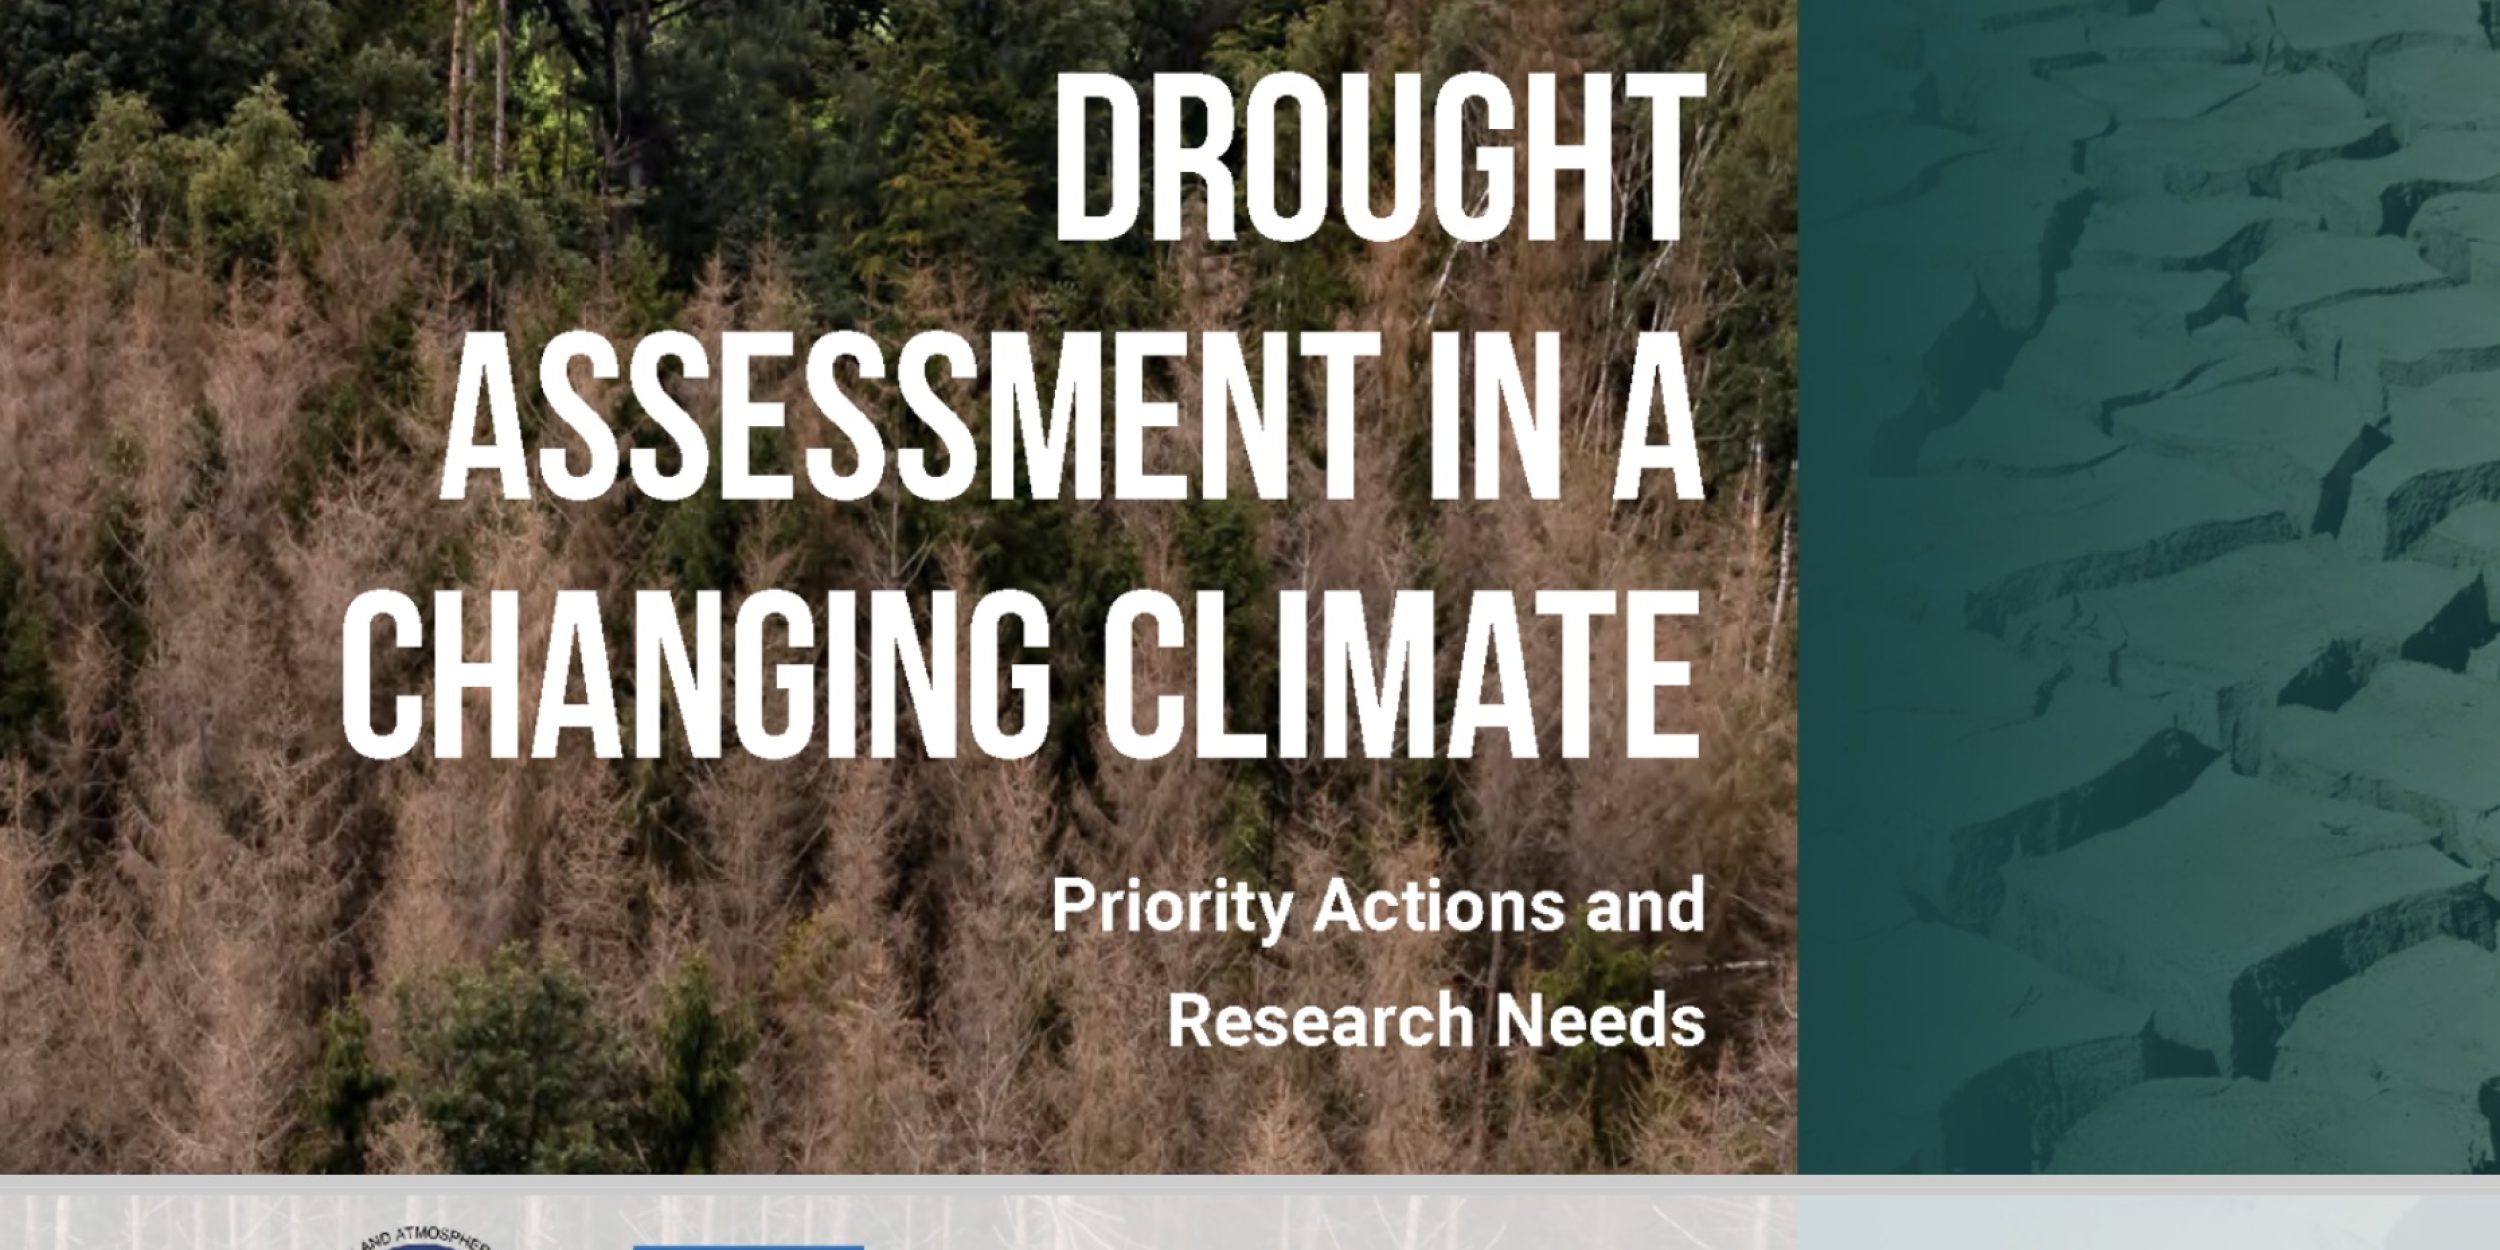 title page of "Drought Assessment in a Changing Climate"